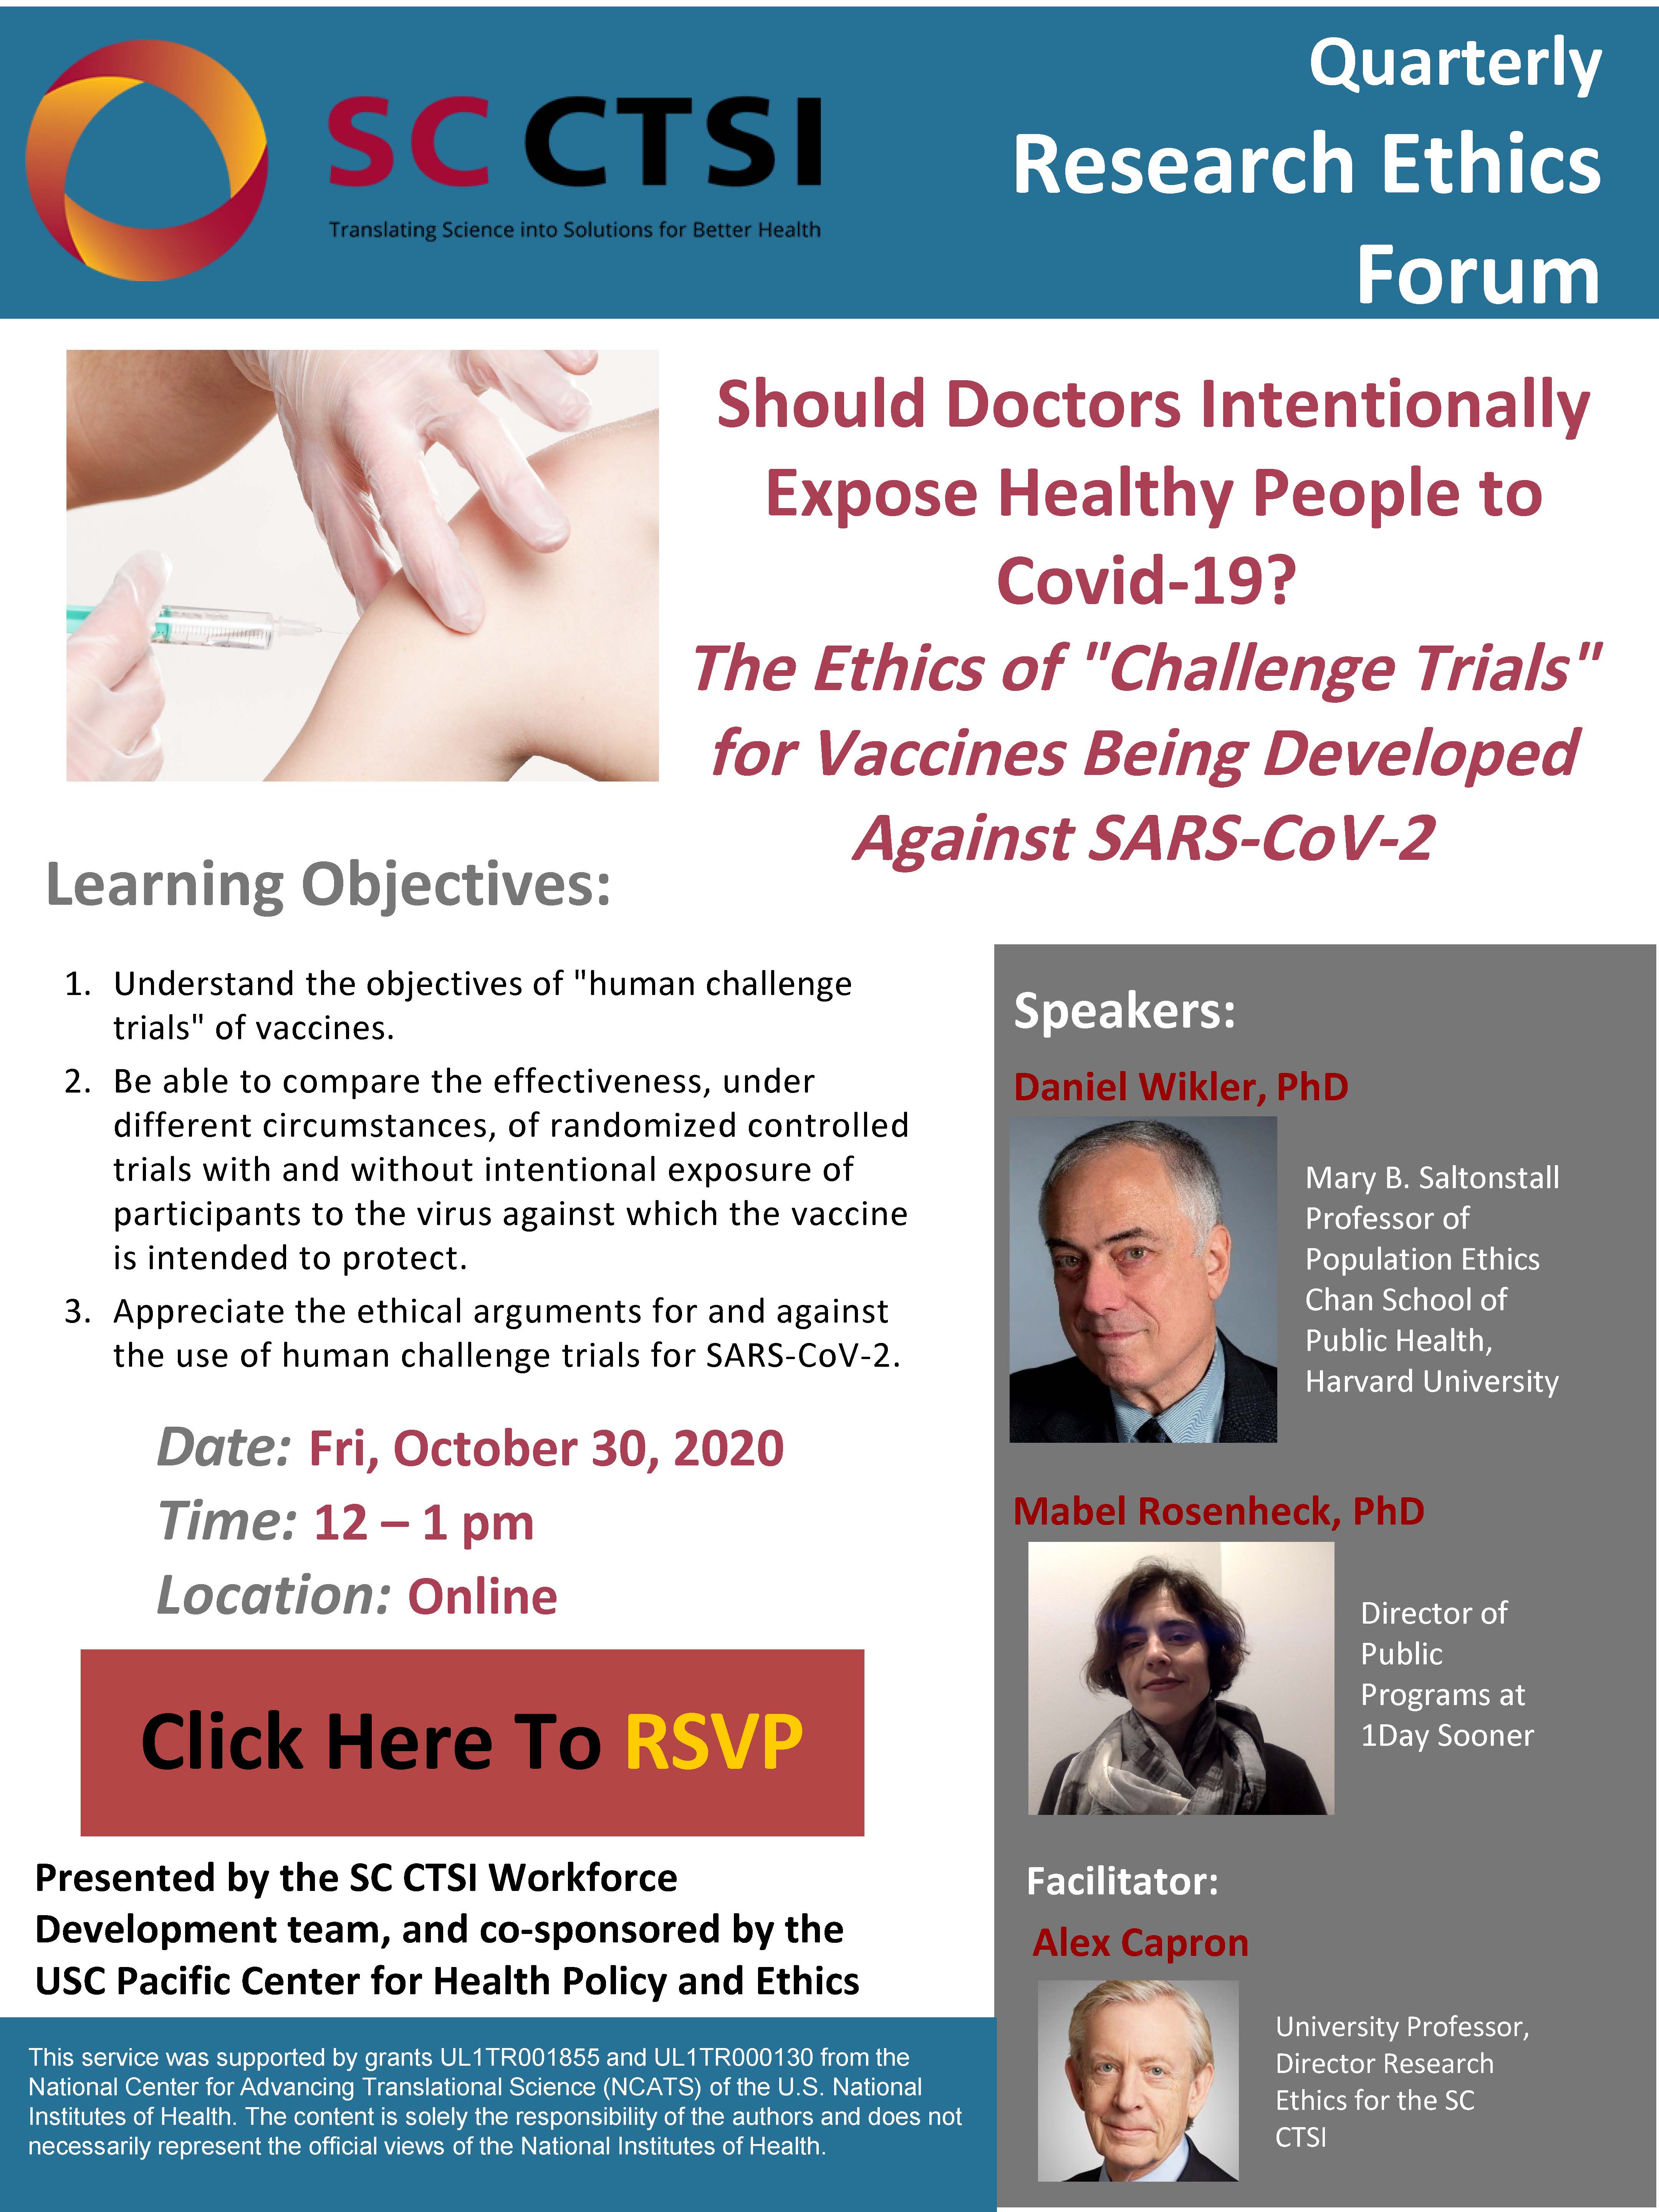 Should Doctors Intentionally Expose Healthy People to Covid-19?